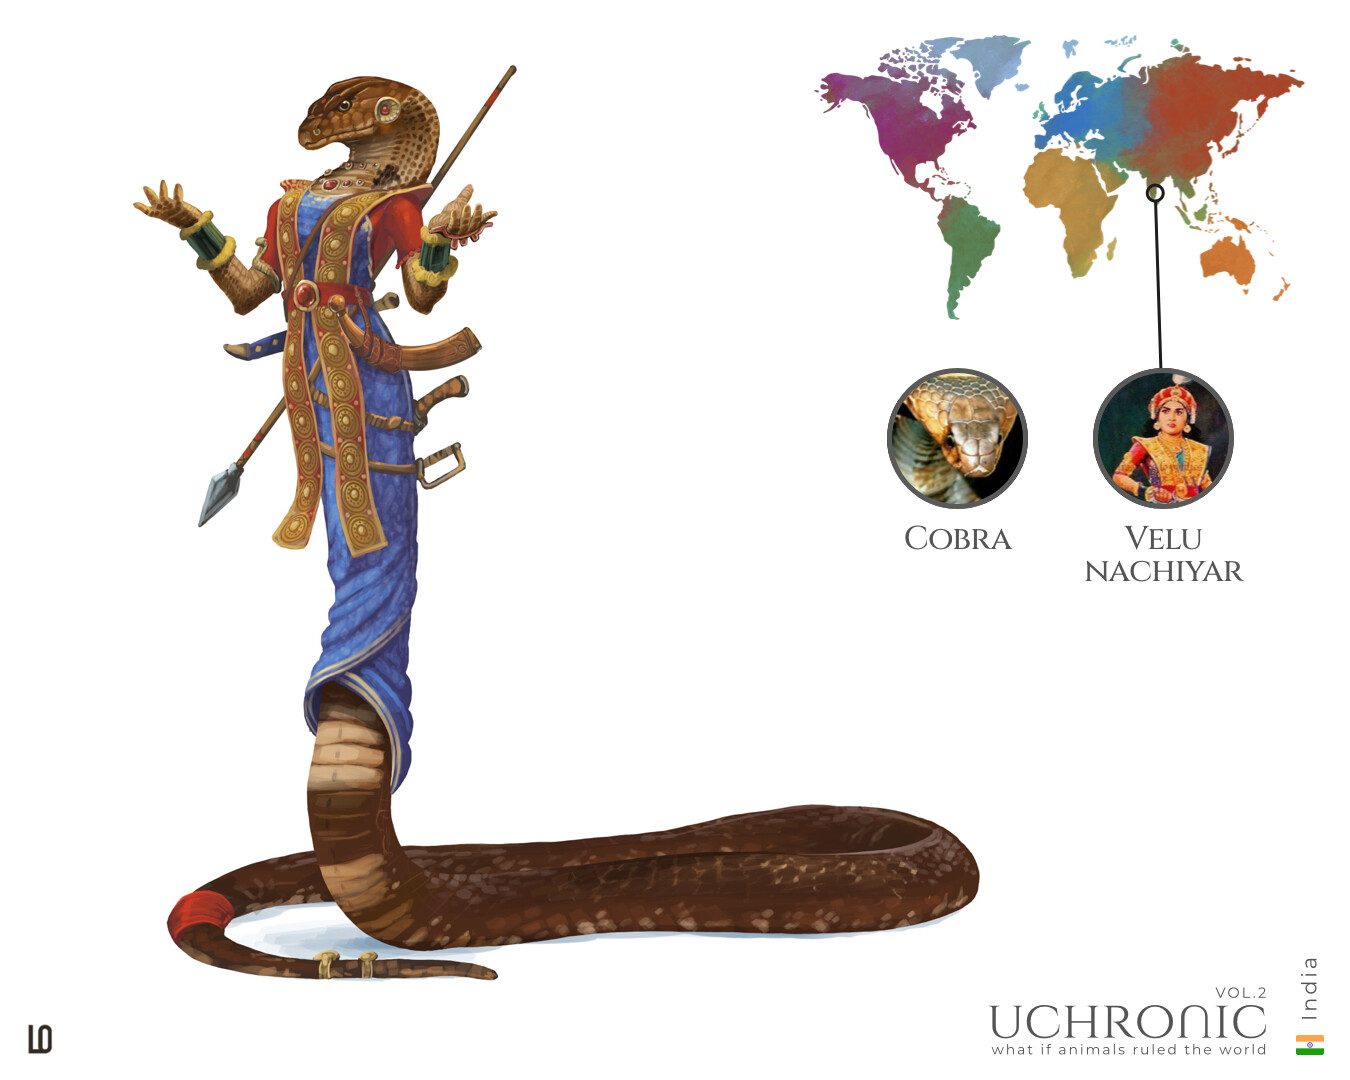 Velu Nachiyar, from India, would be as hypnotic and dangerous Cobra.